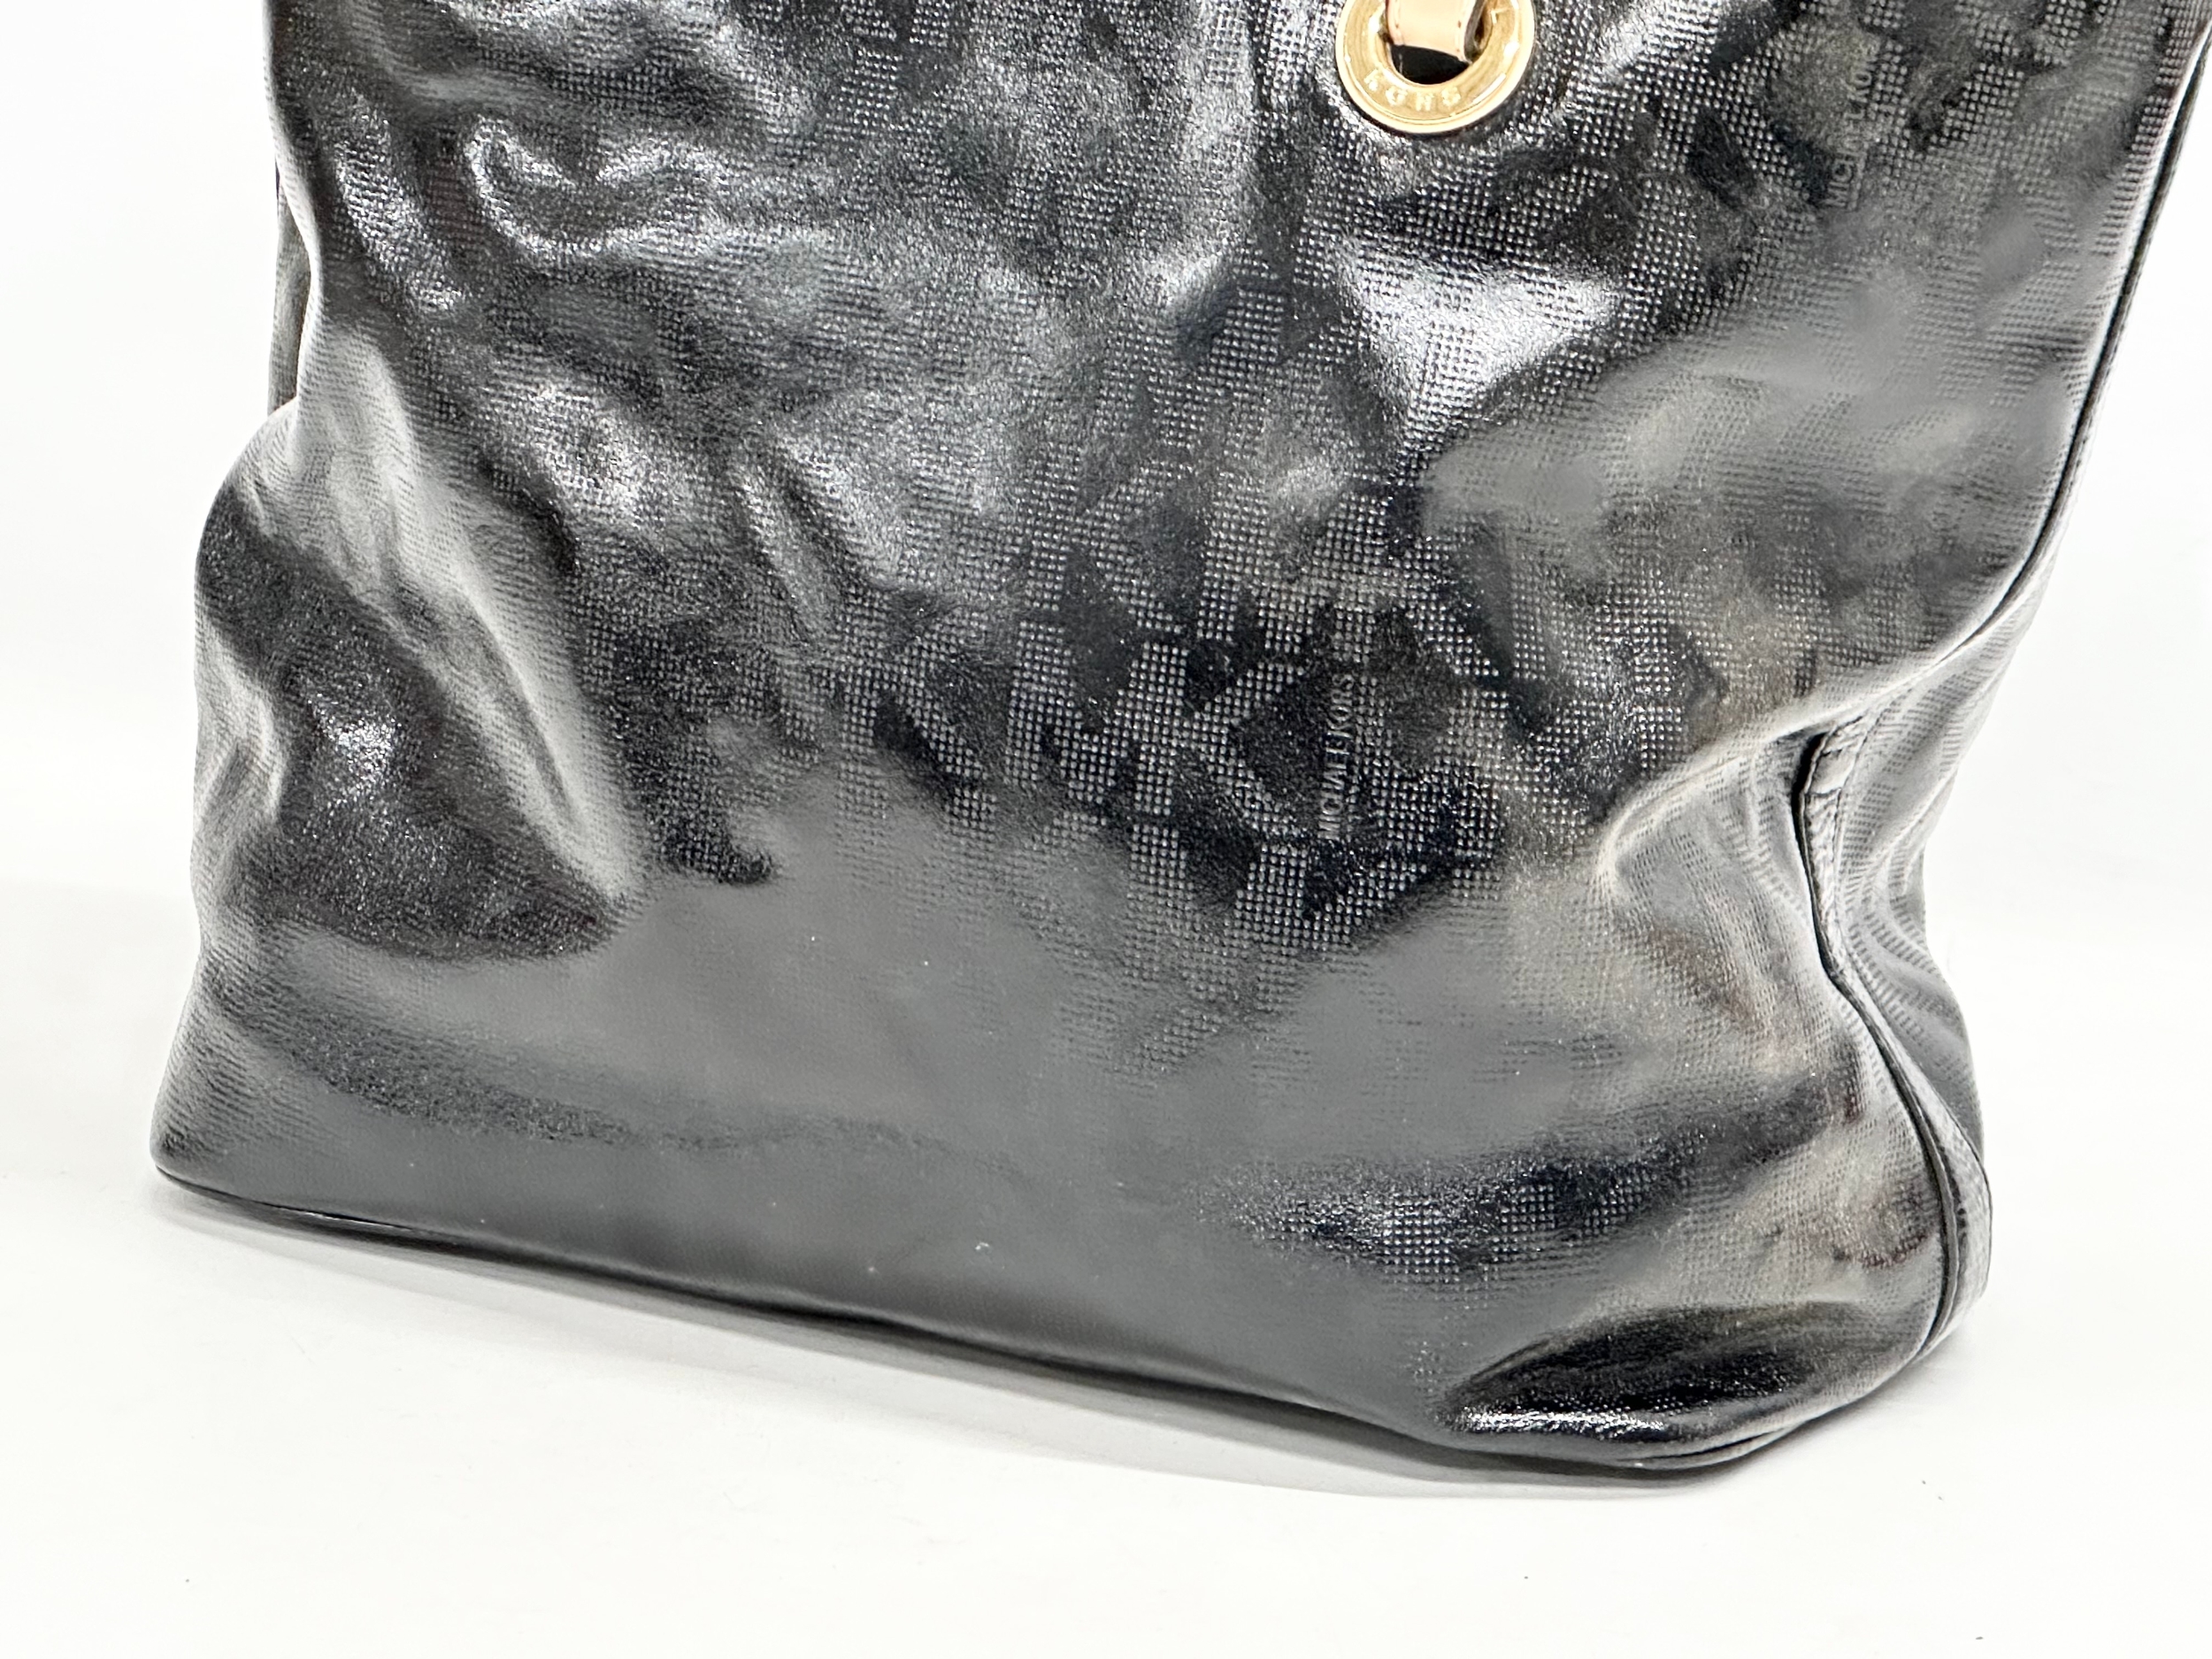 A Michael Kors patent leather tote bag. - Image 2 of 3